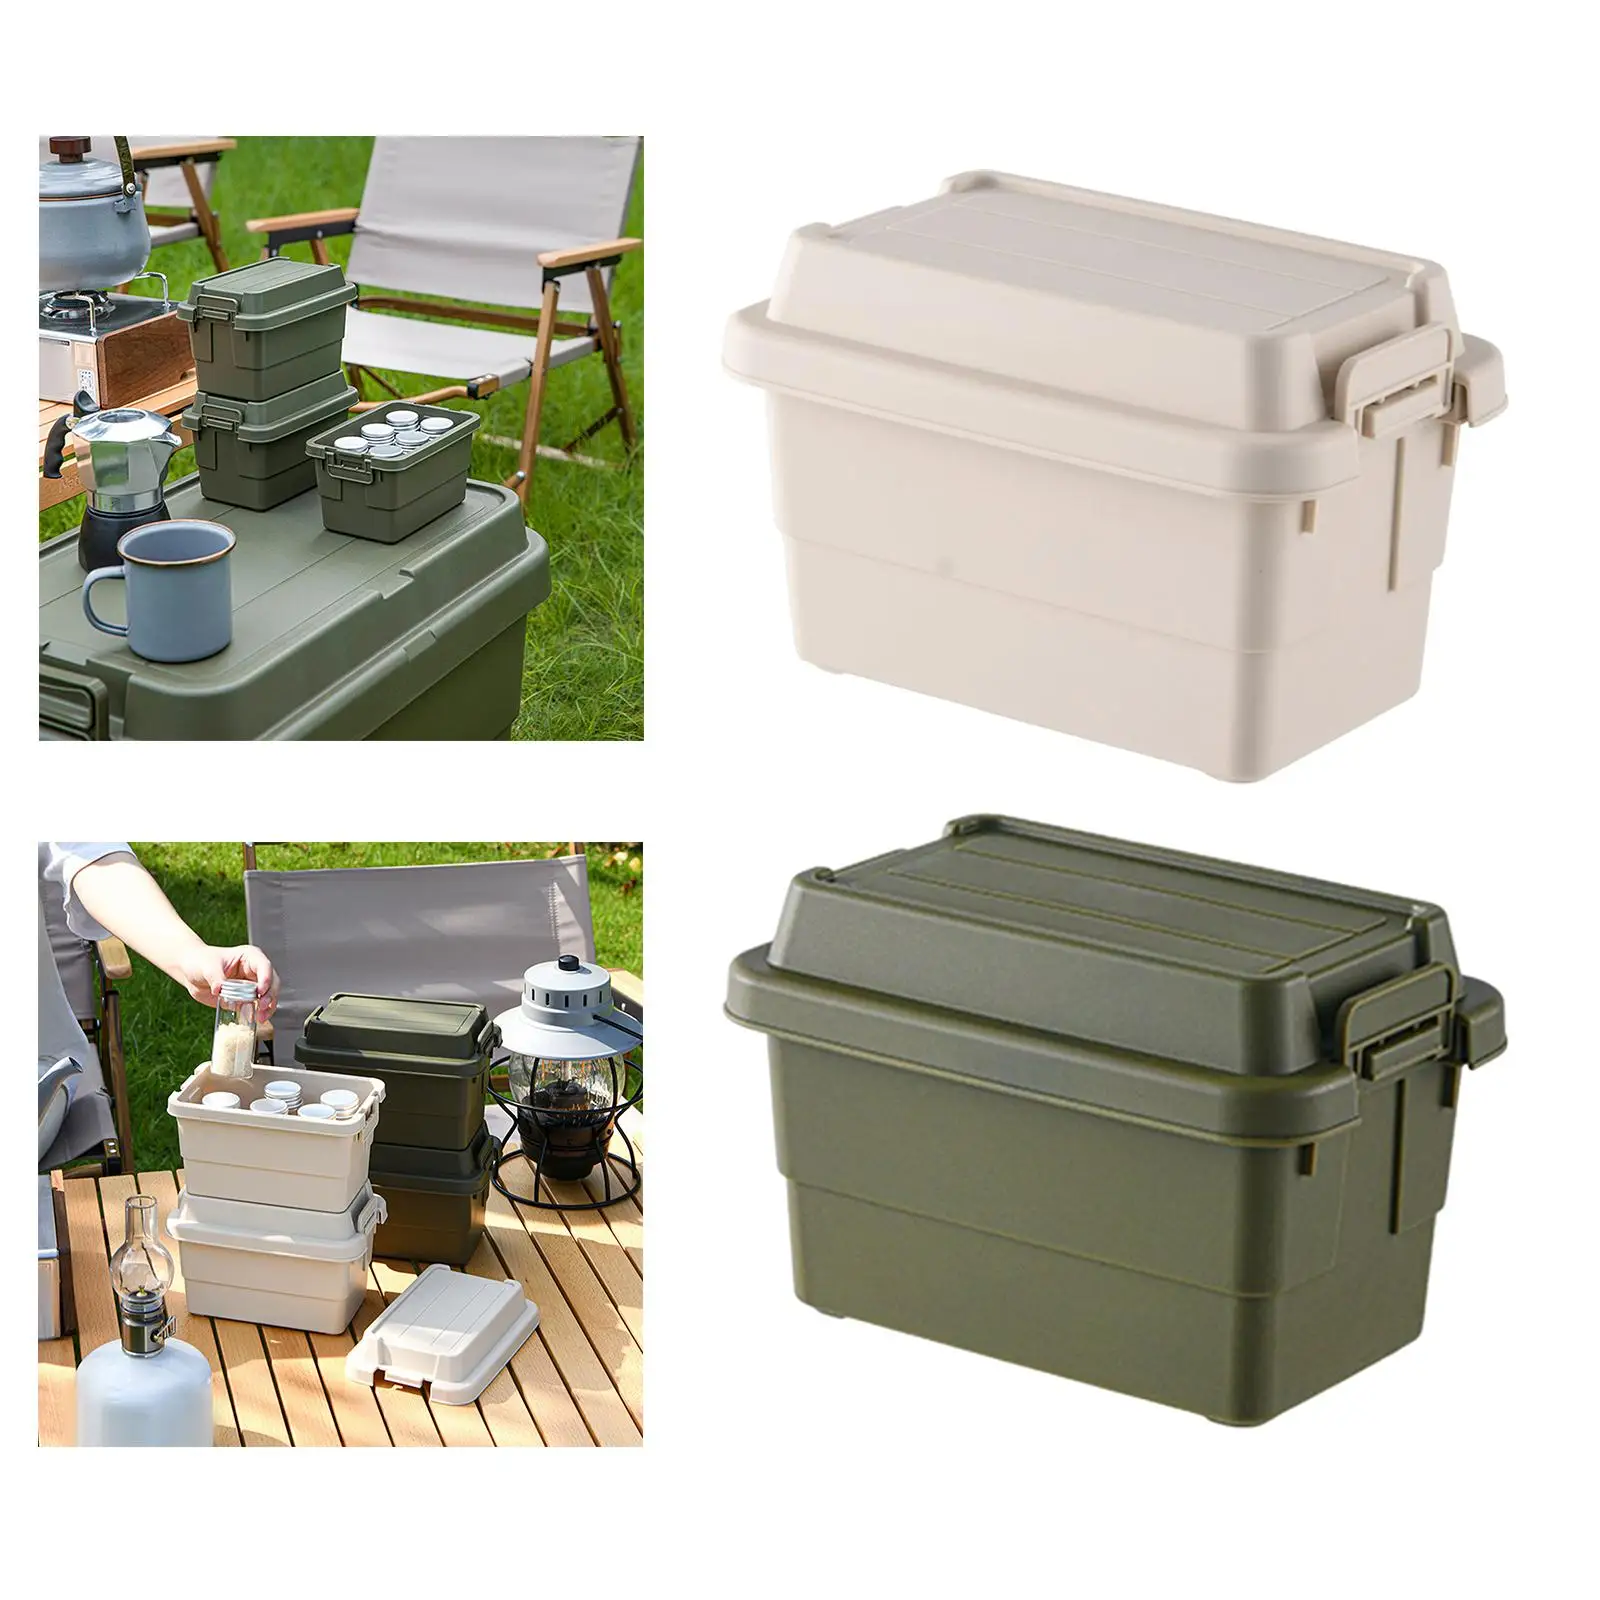 Portable Outdoor Storage Box Multifunctional Picnic Container Case Car Trunk Organizer for Travel Fishing Kitchen BBQ Barbecue